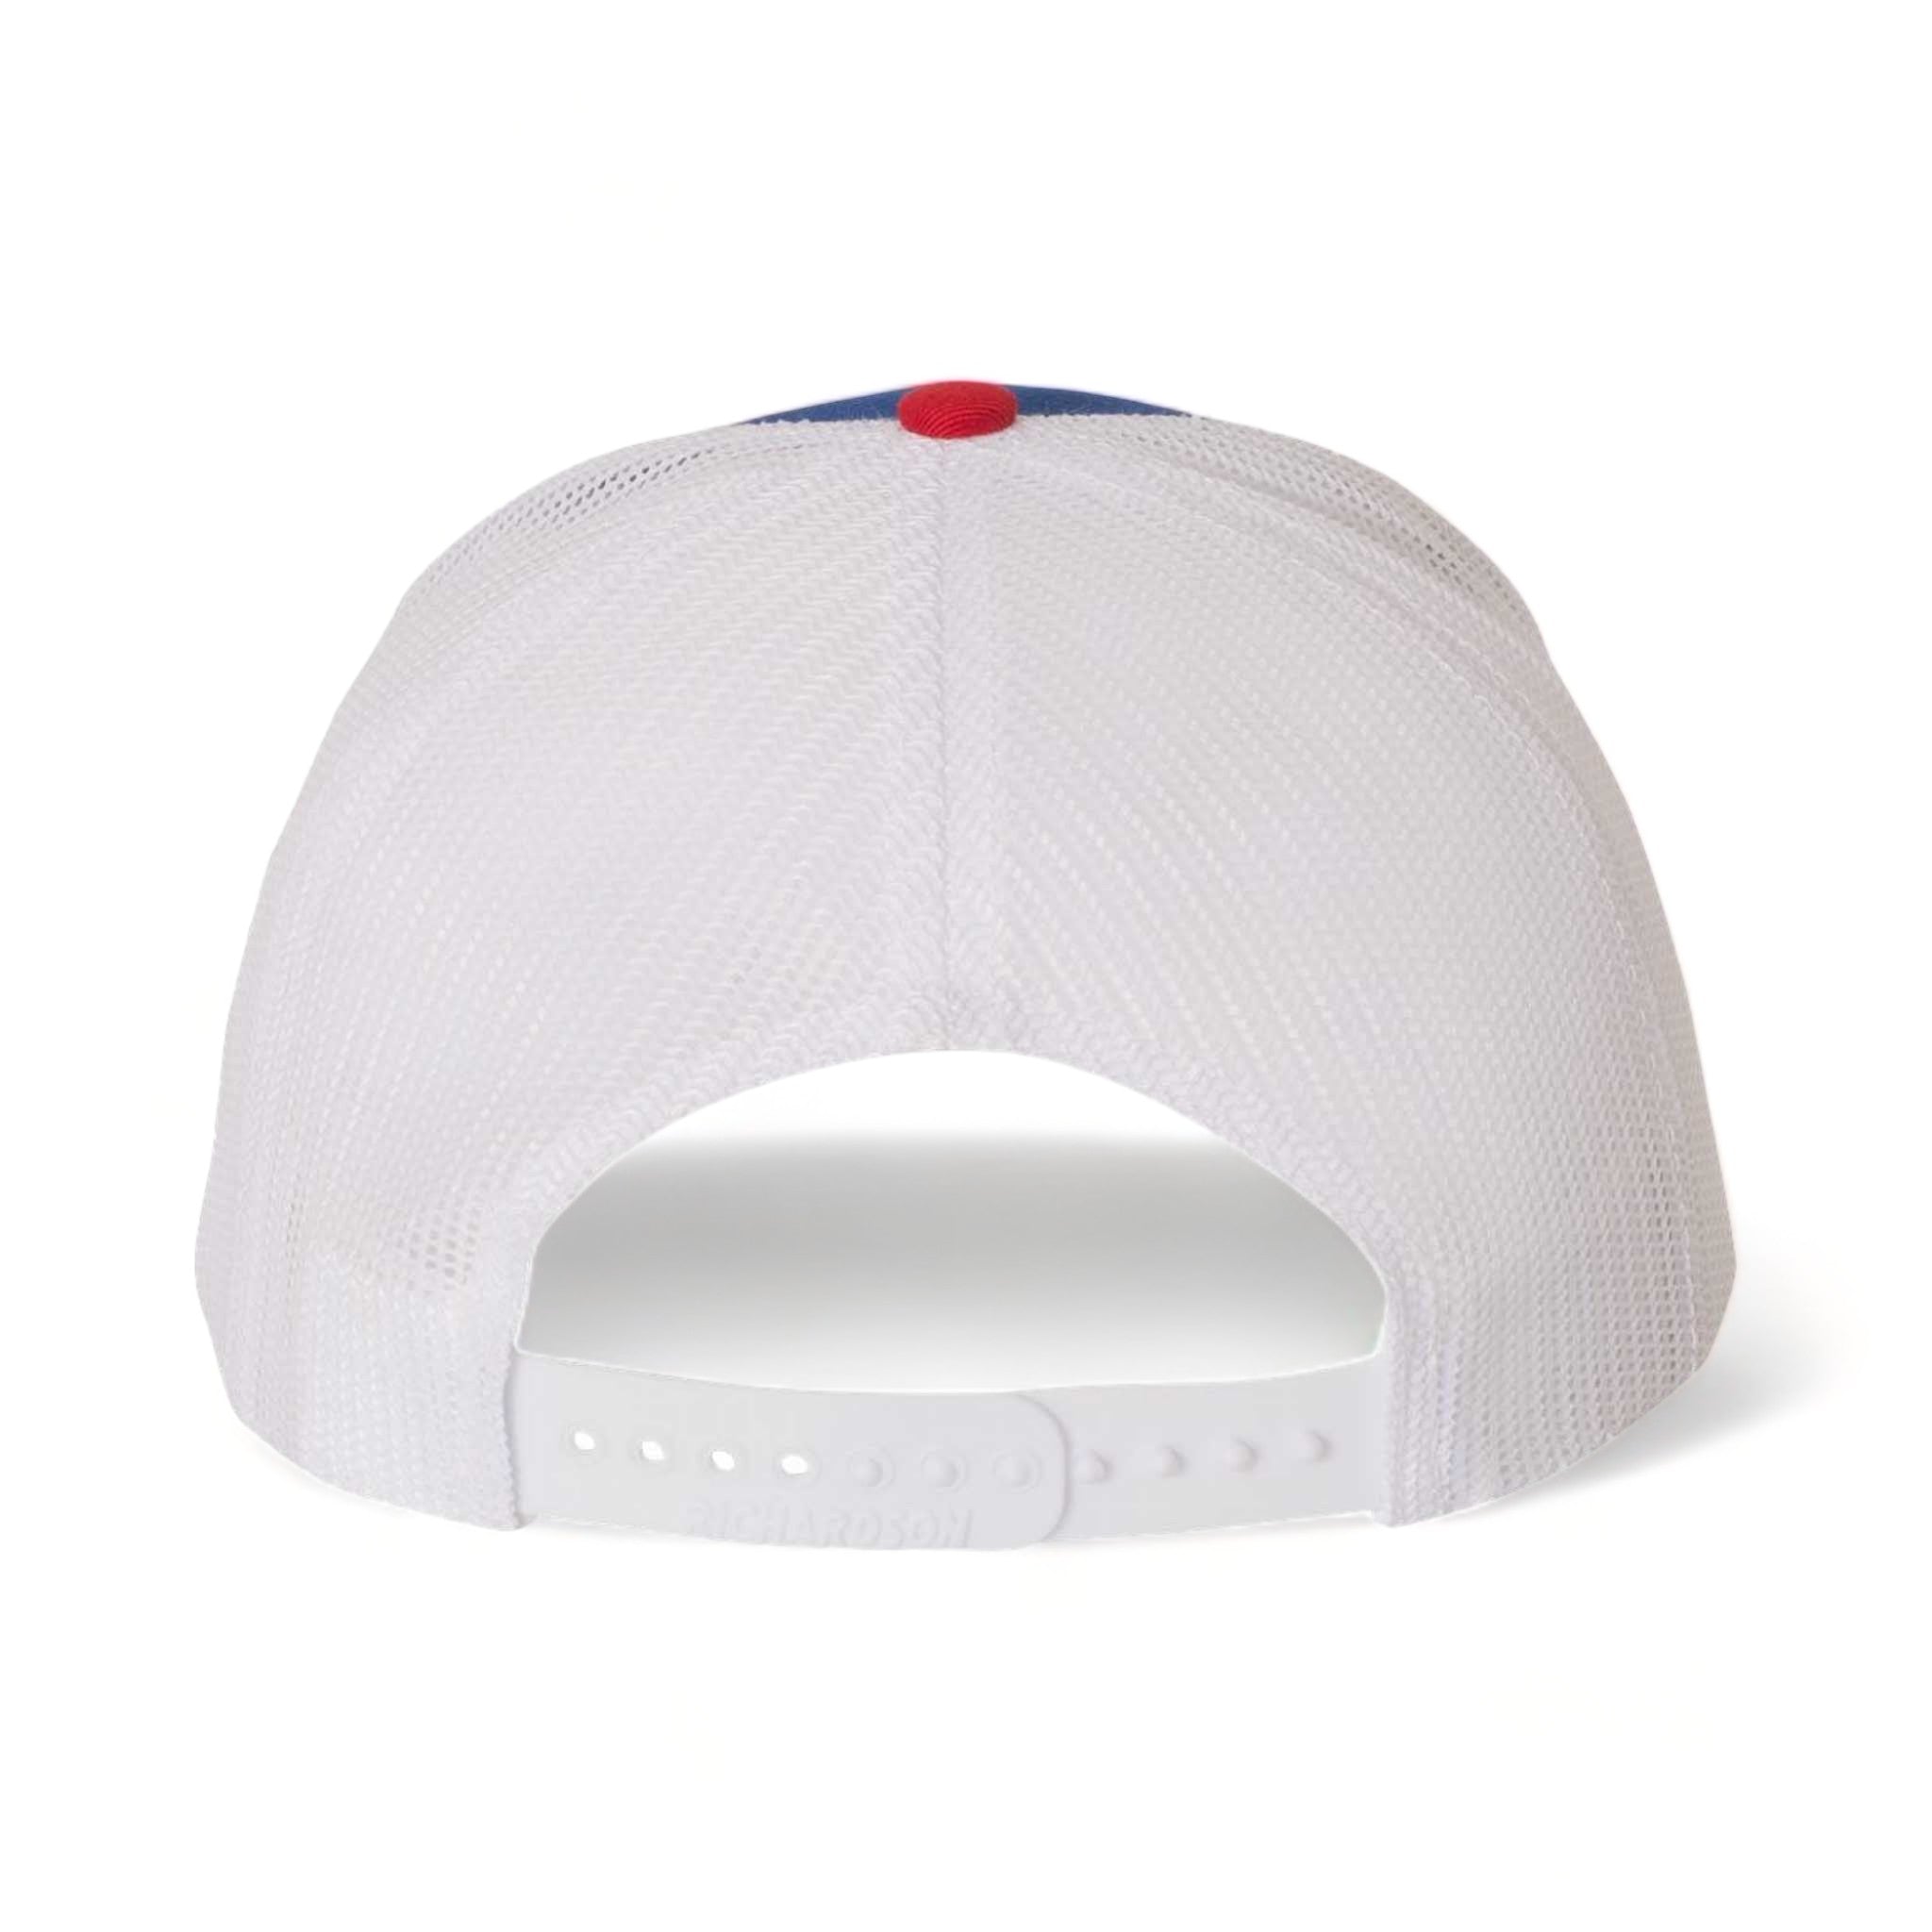 Back view of Richardson 112 custom hat in royal, white and red